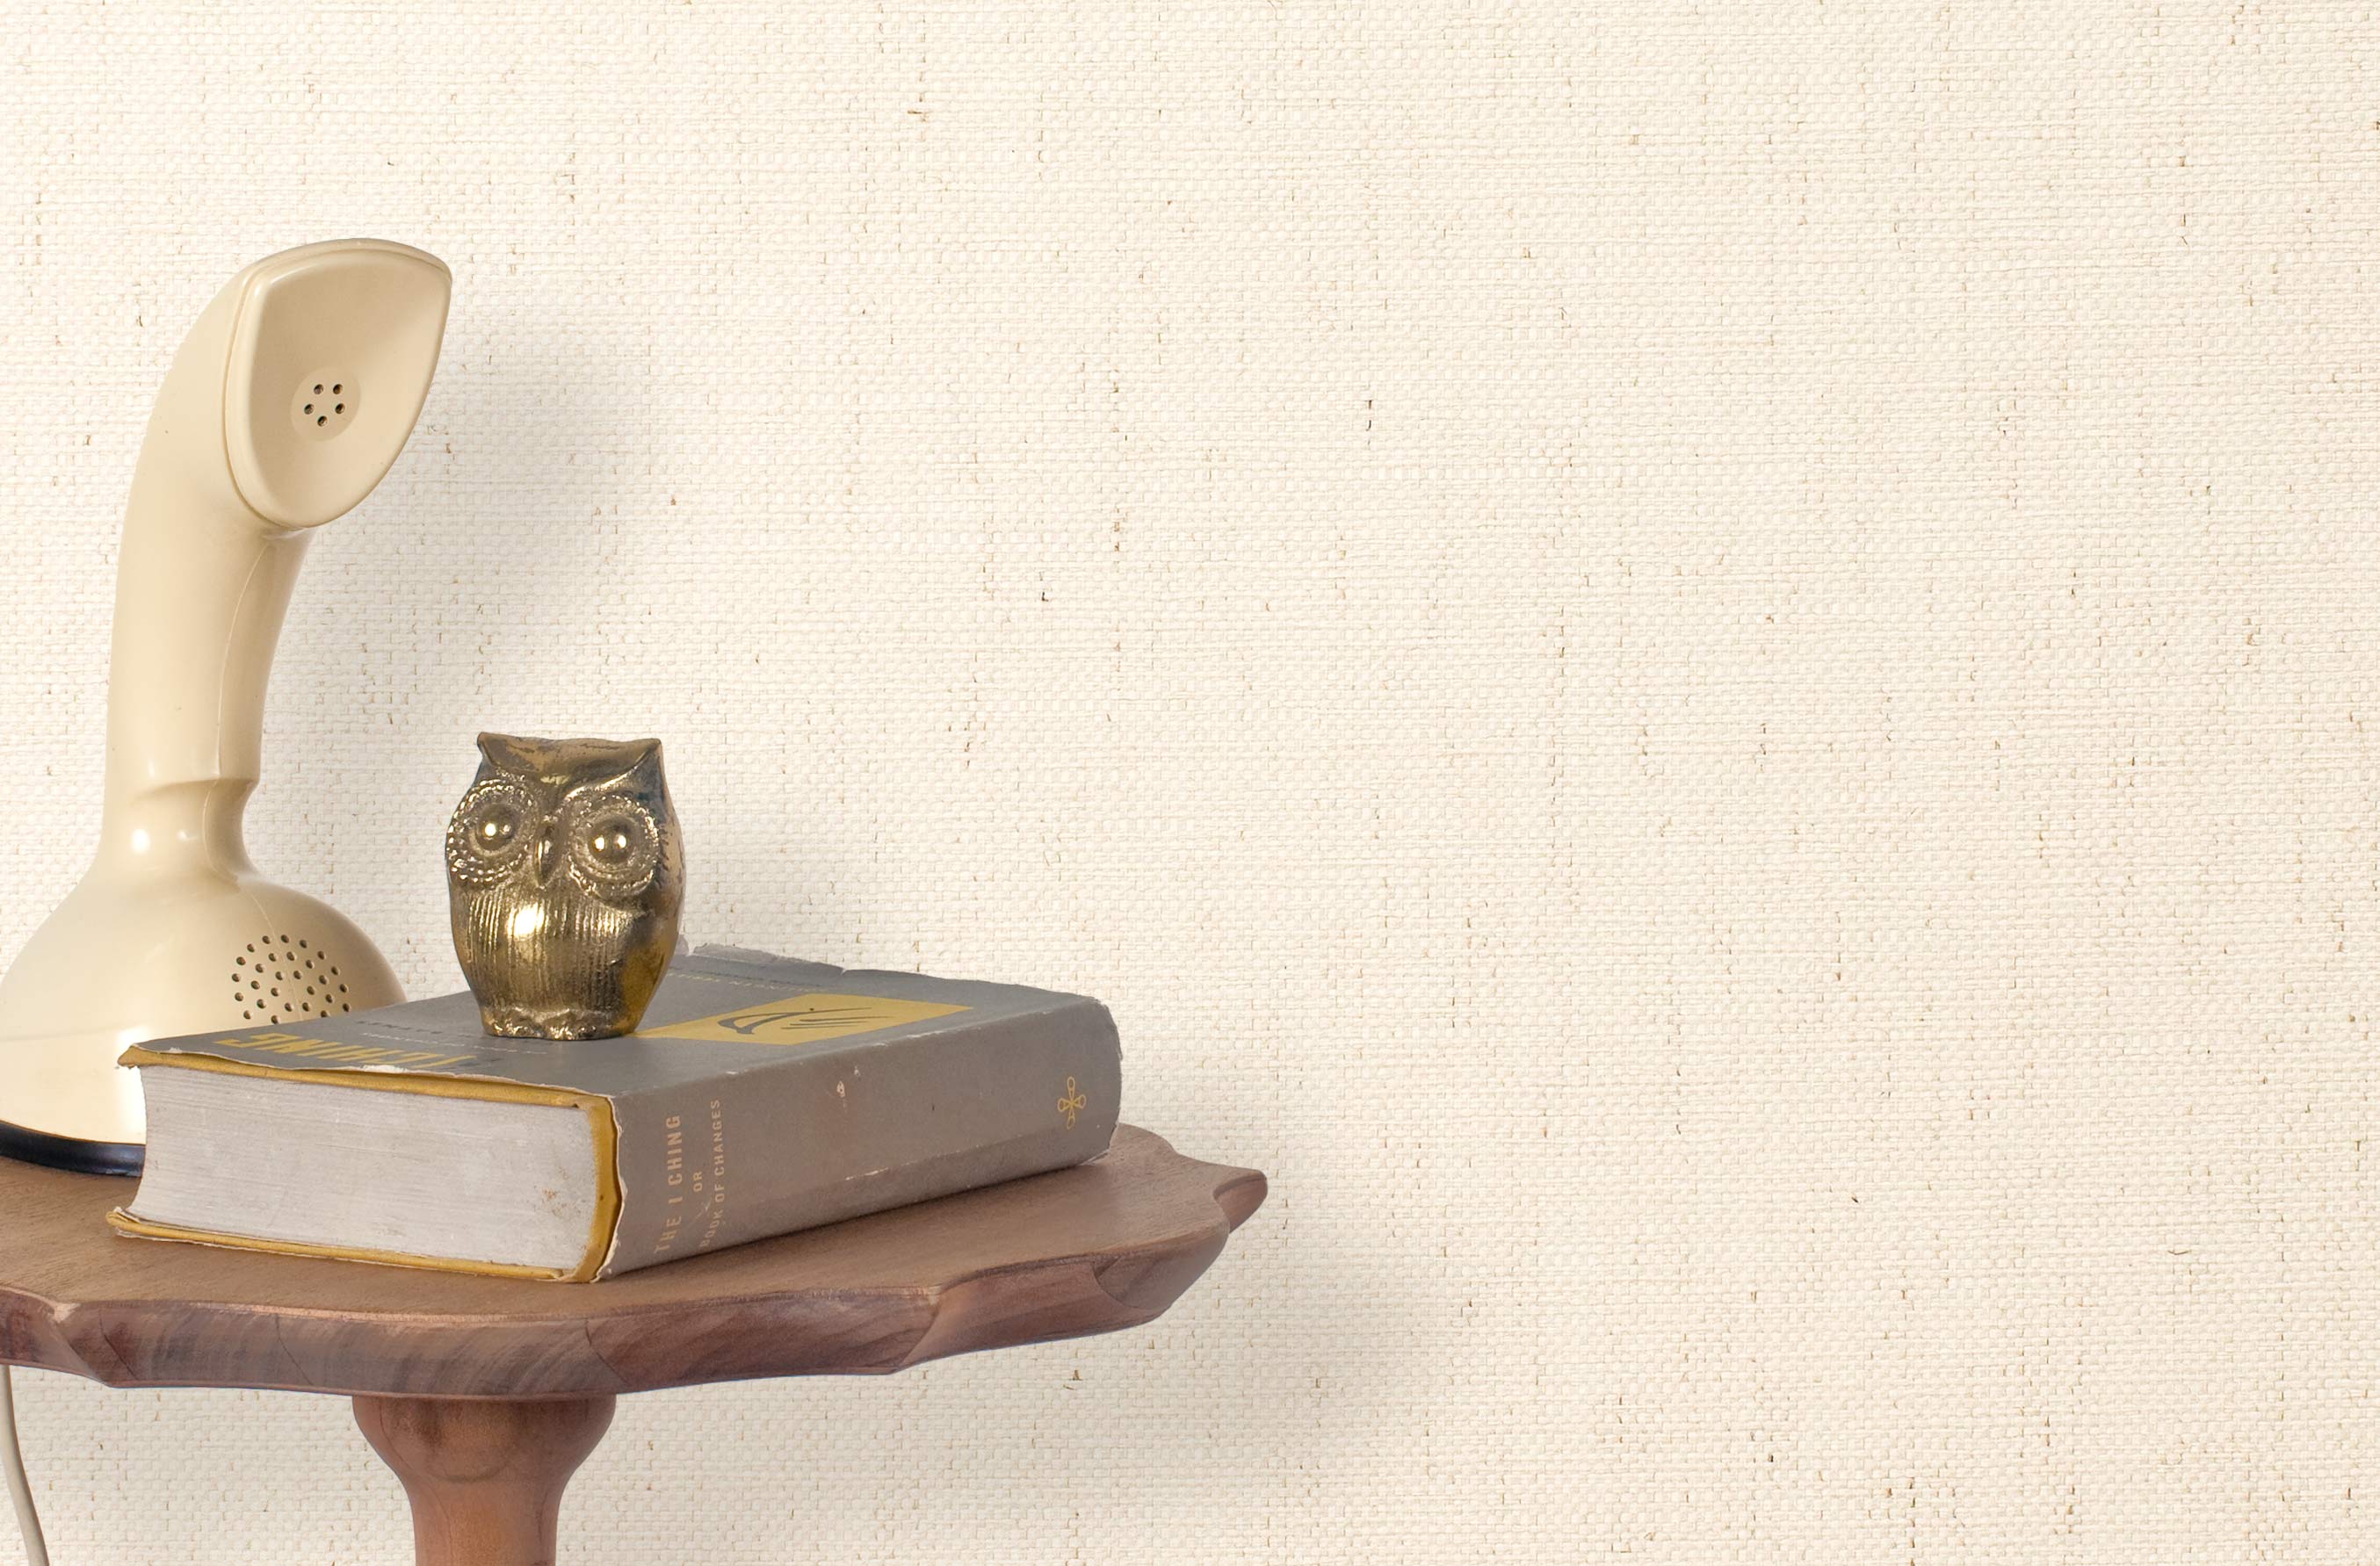 End table with a phone, book and owl sculpture in front of a wall covered in paperweave grasscloth in cream.